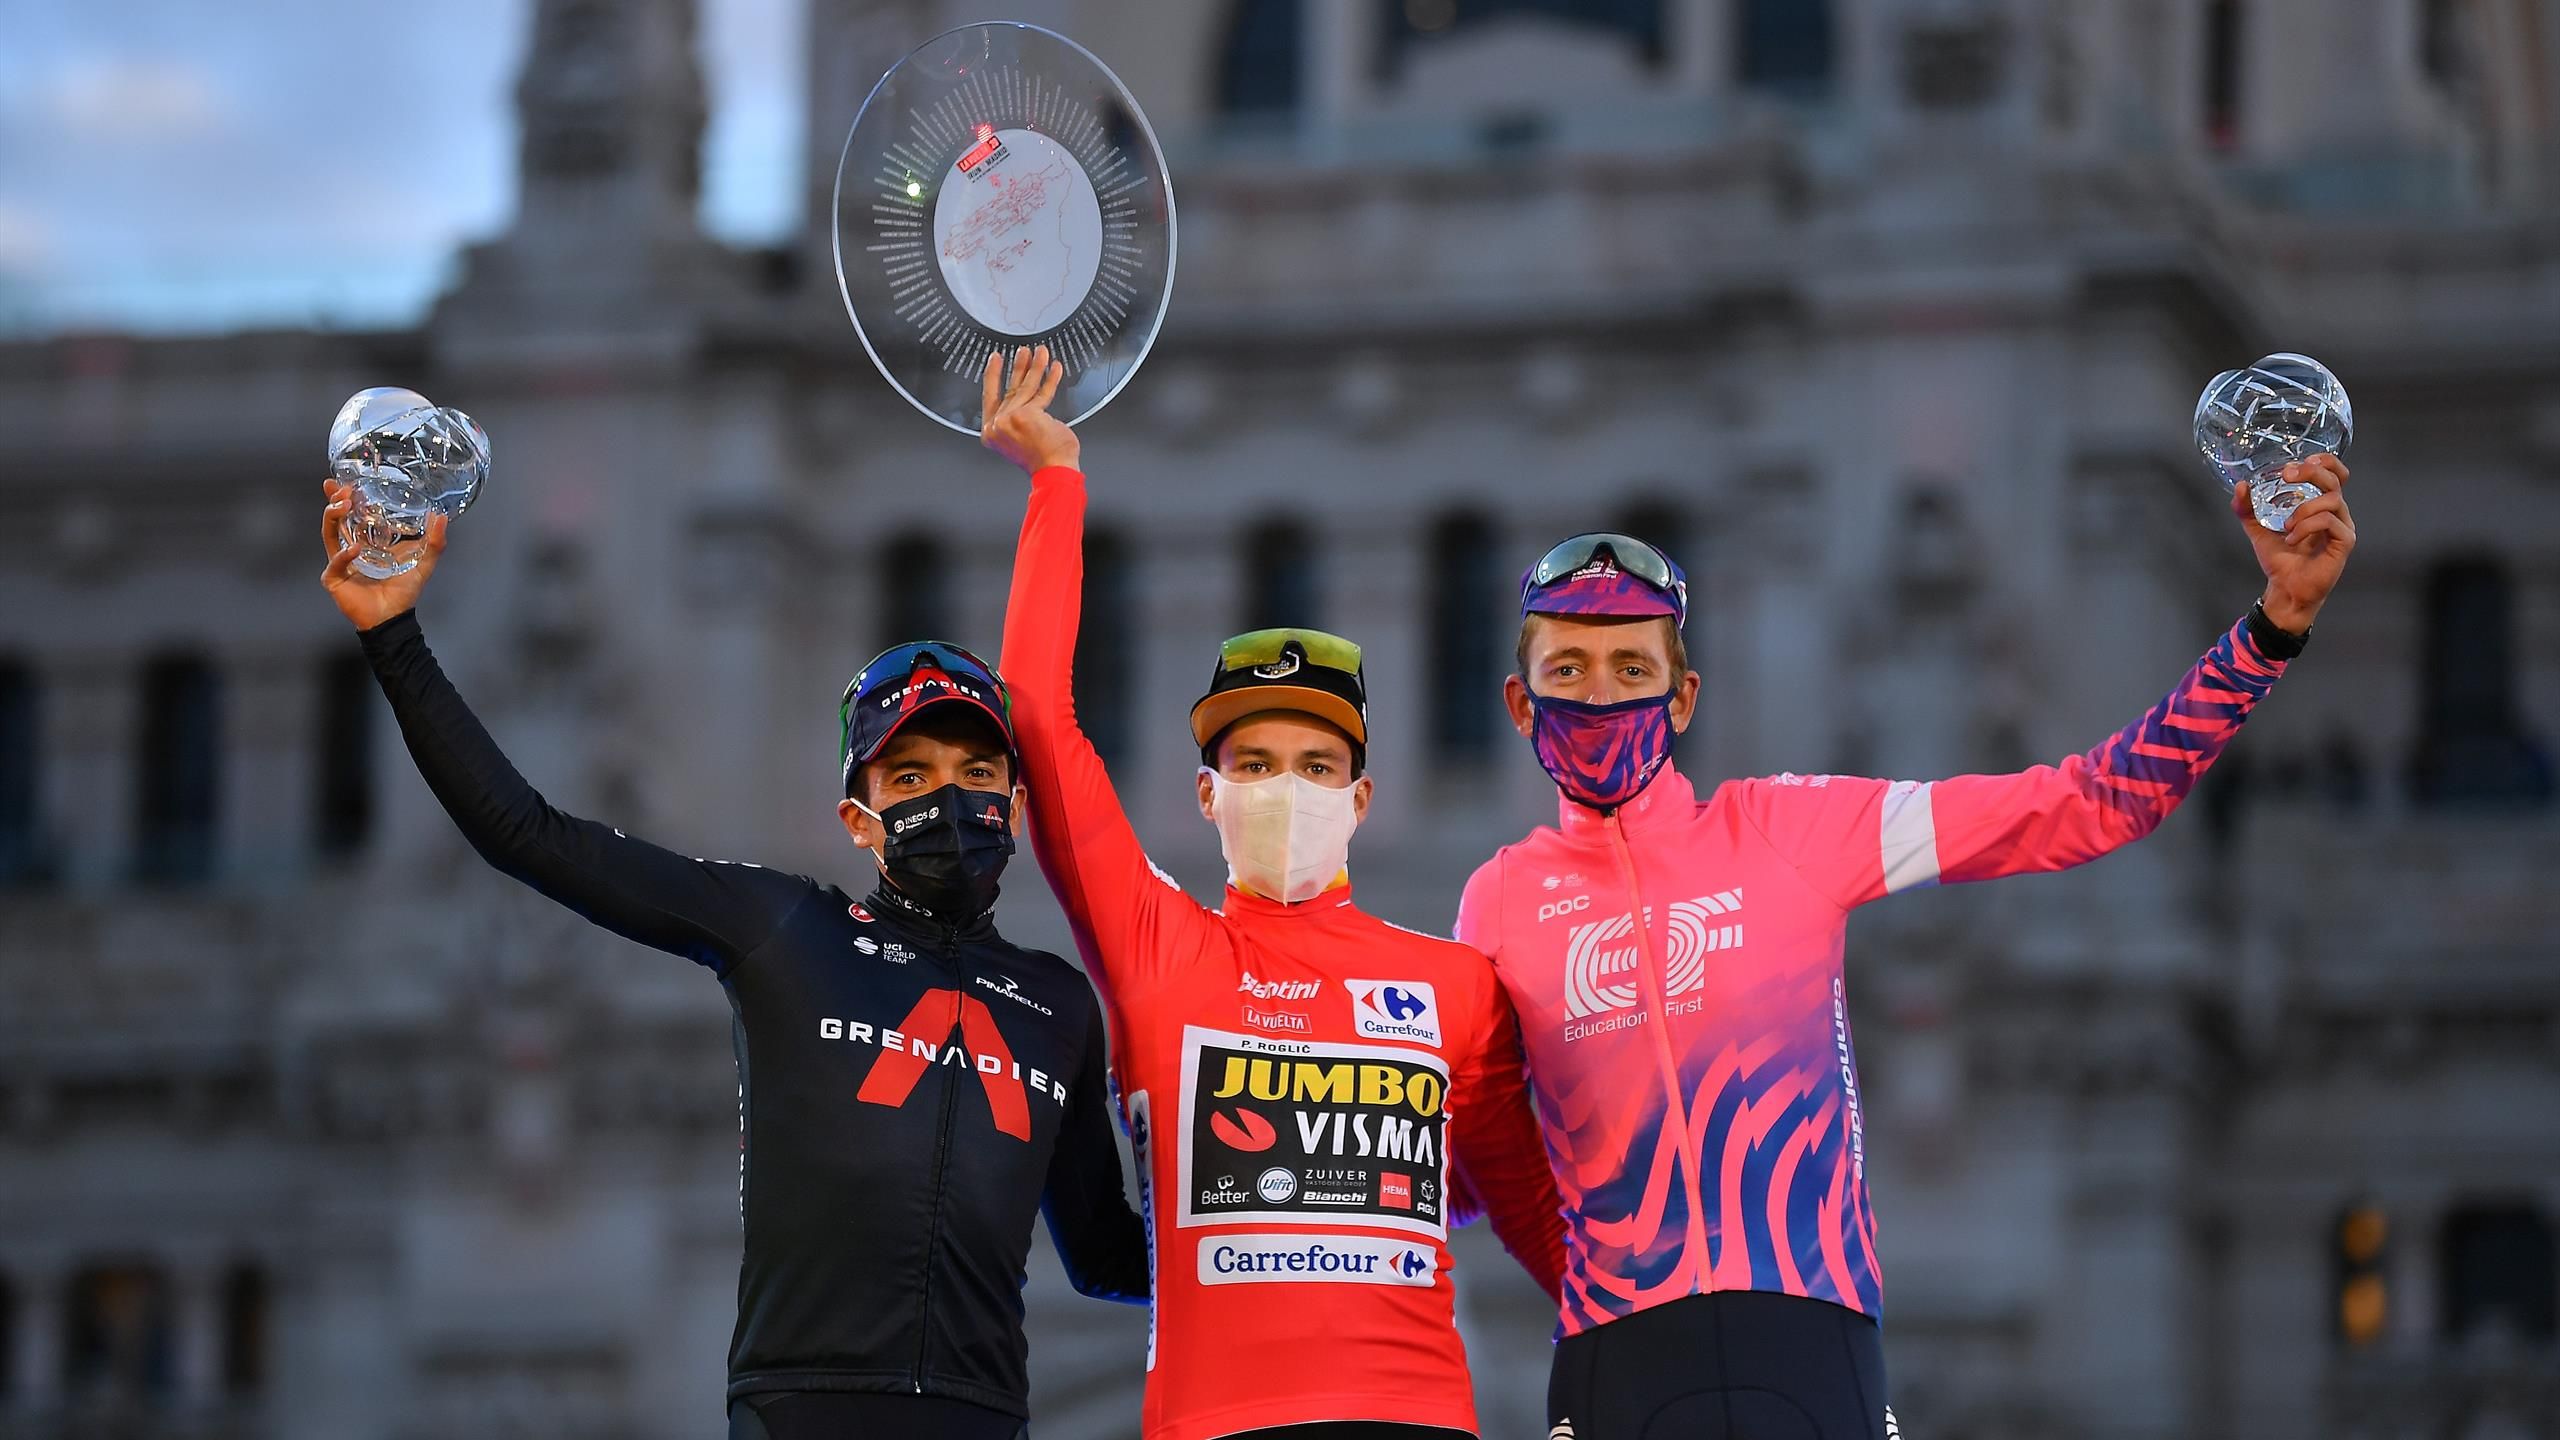 How to watch the Vuelta a Espana 2021 - live TV and streaming details for race on Eurosport